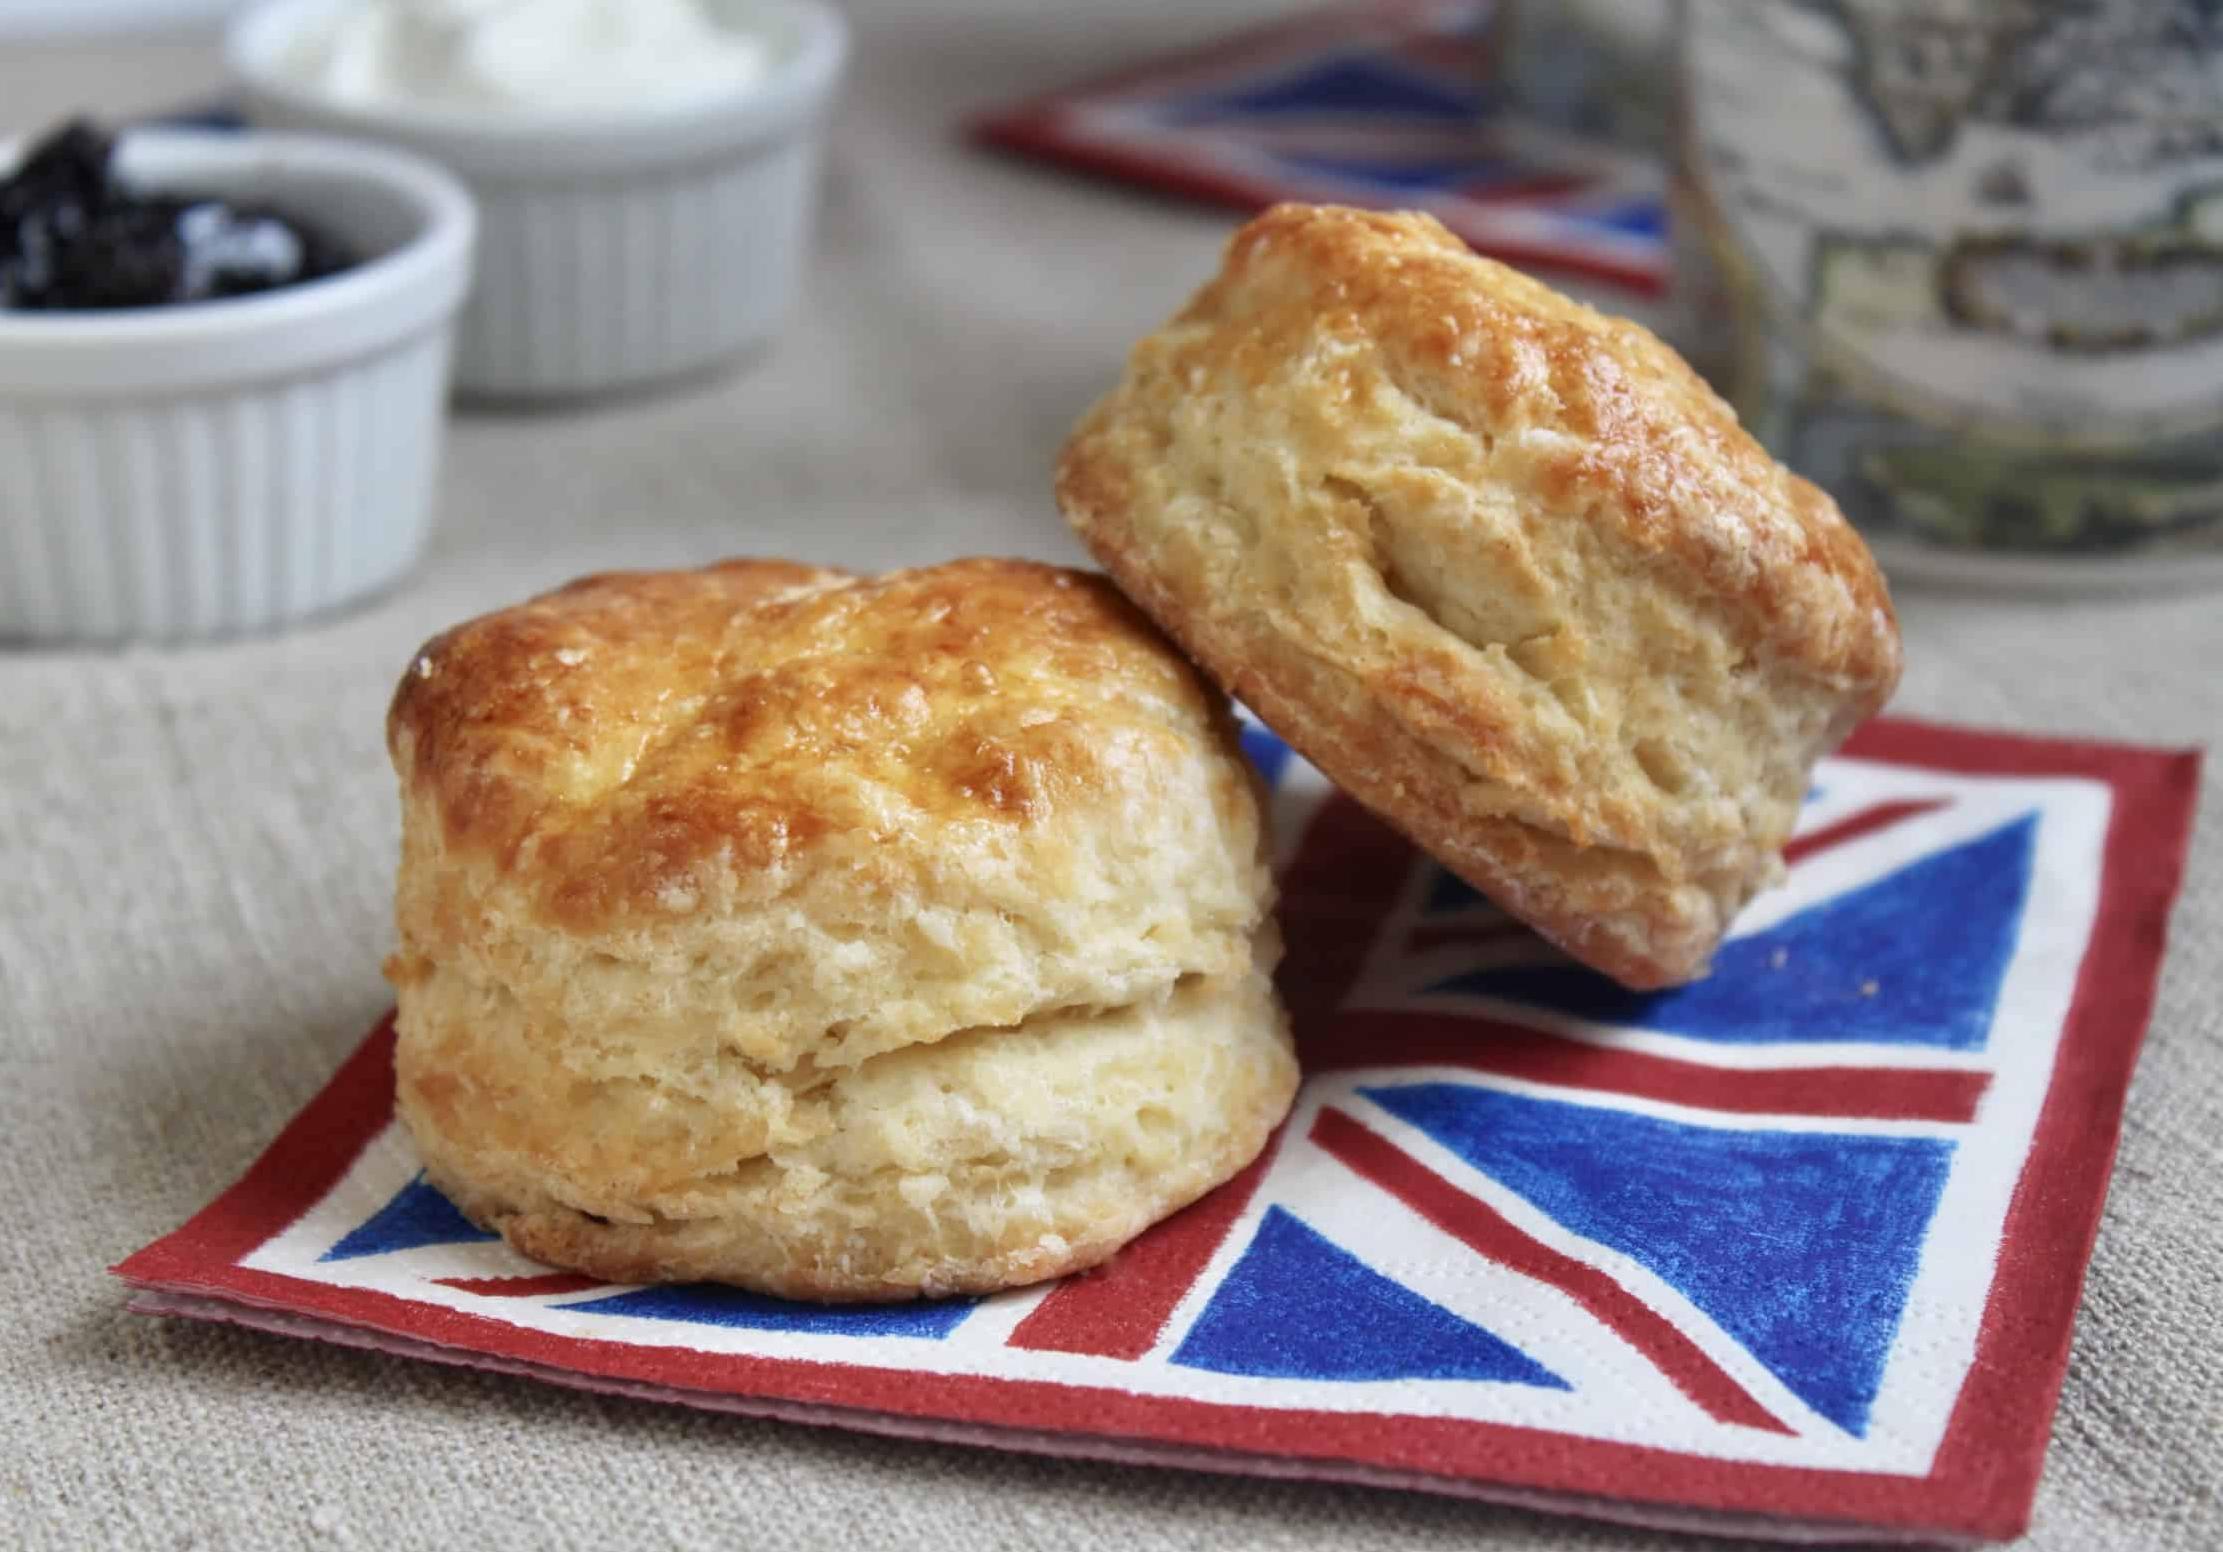  These easy-to-make scones are the perfect recipe for a weekend brunch with friends and family.